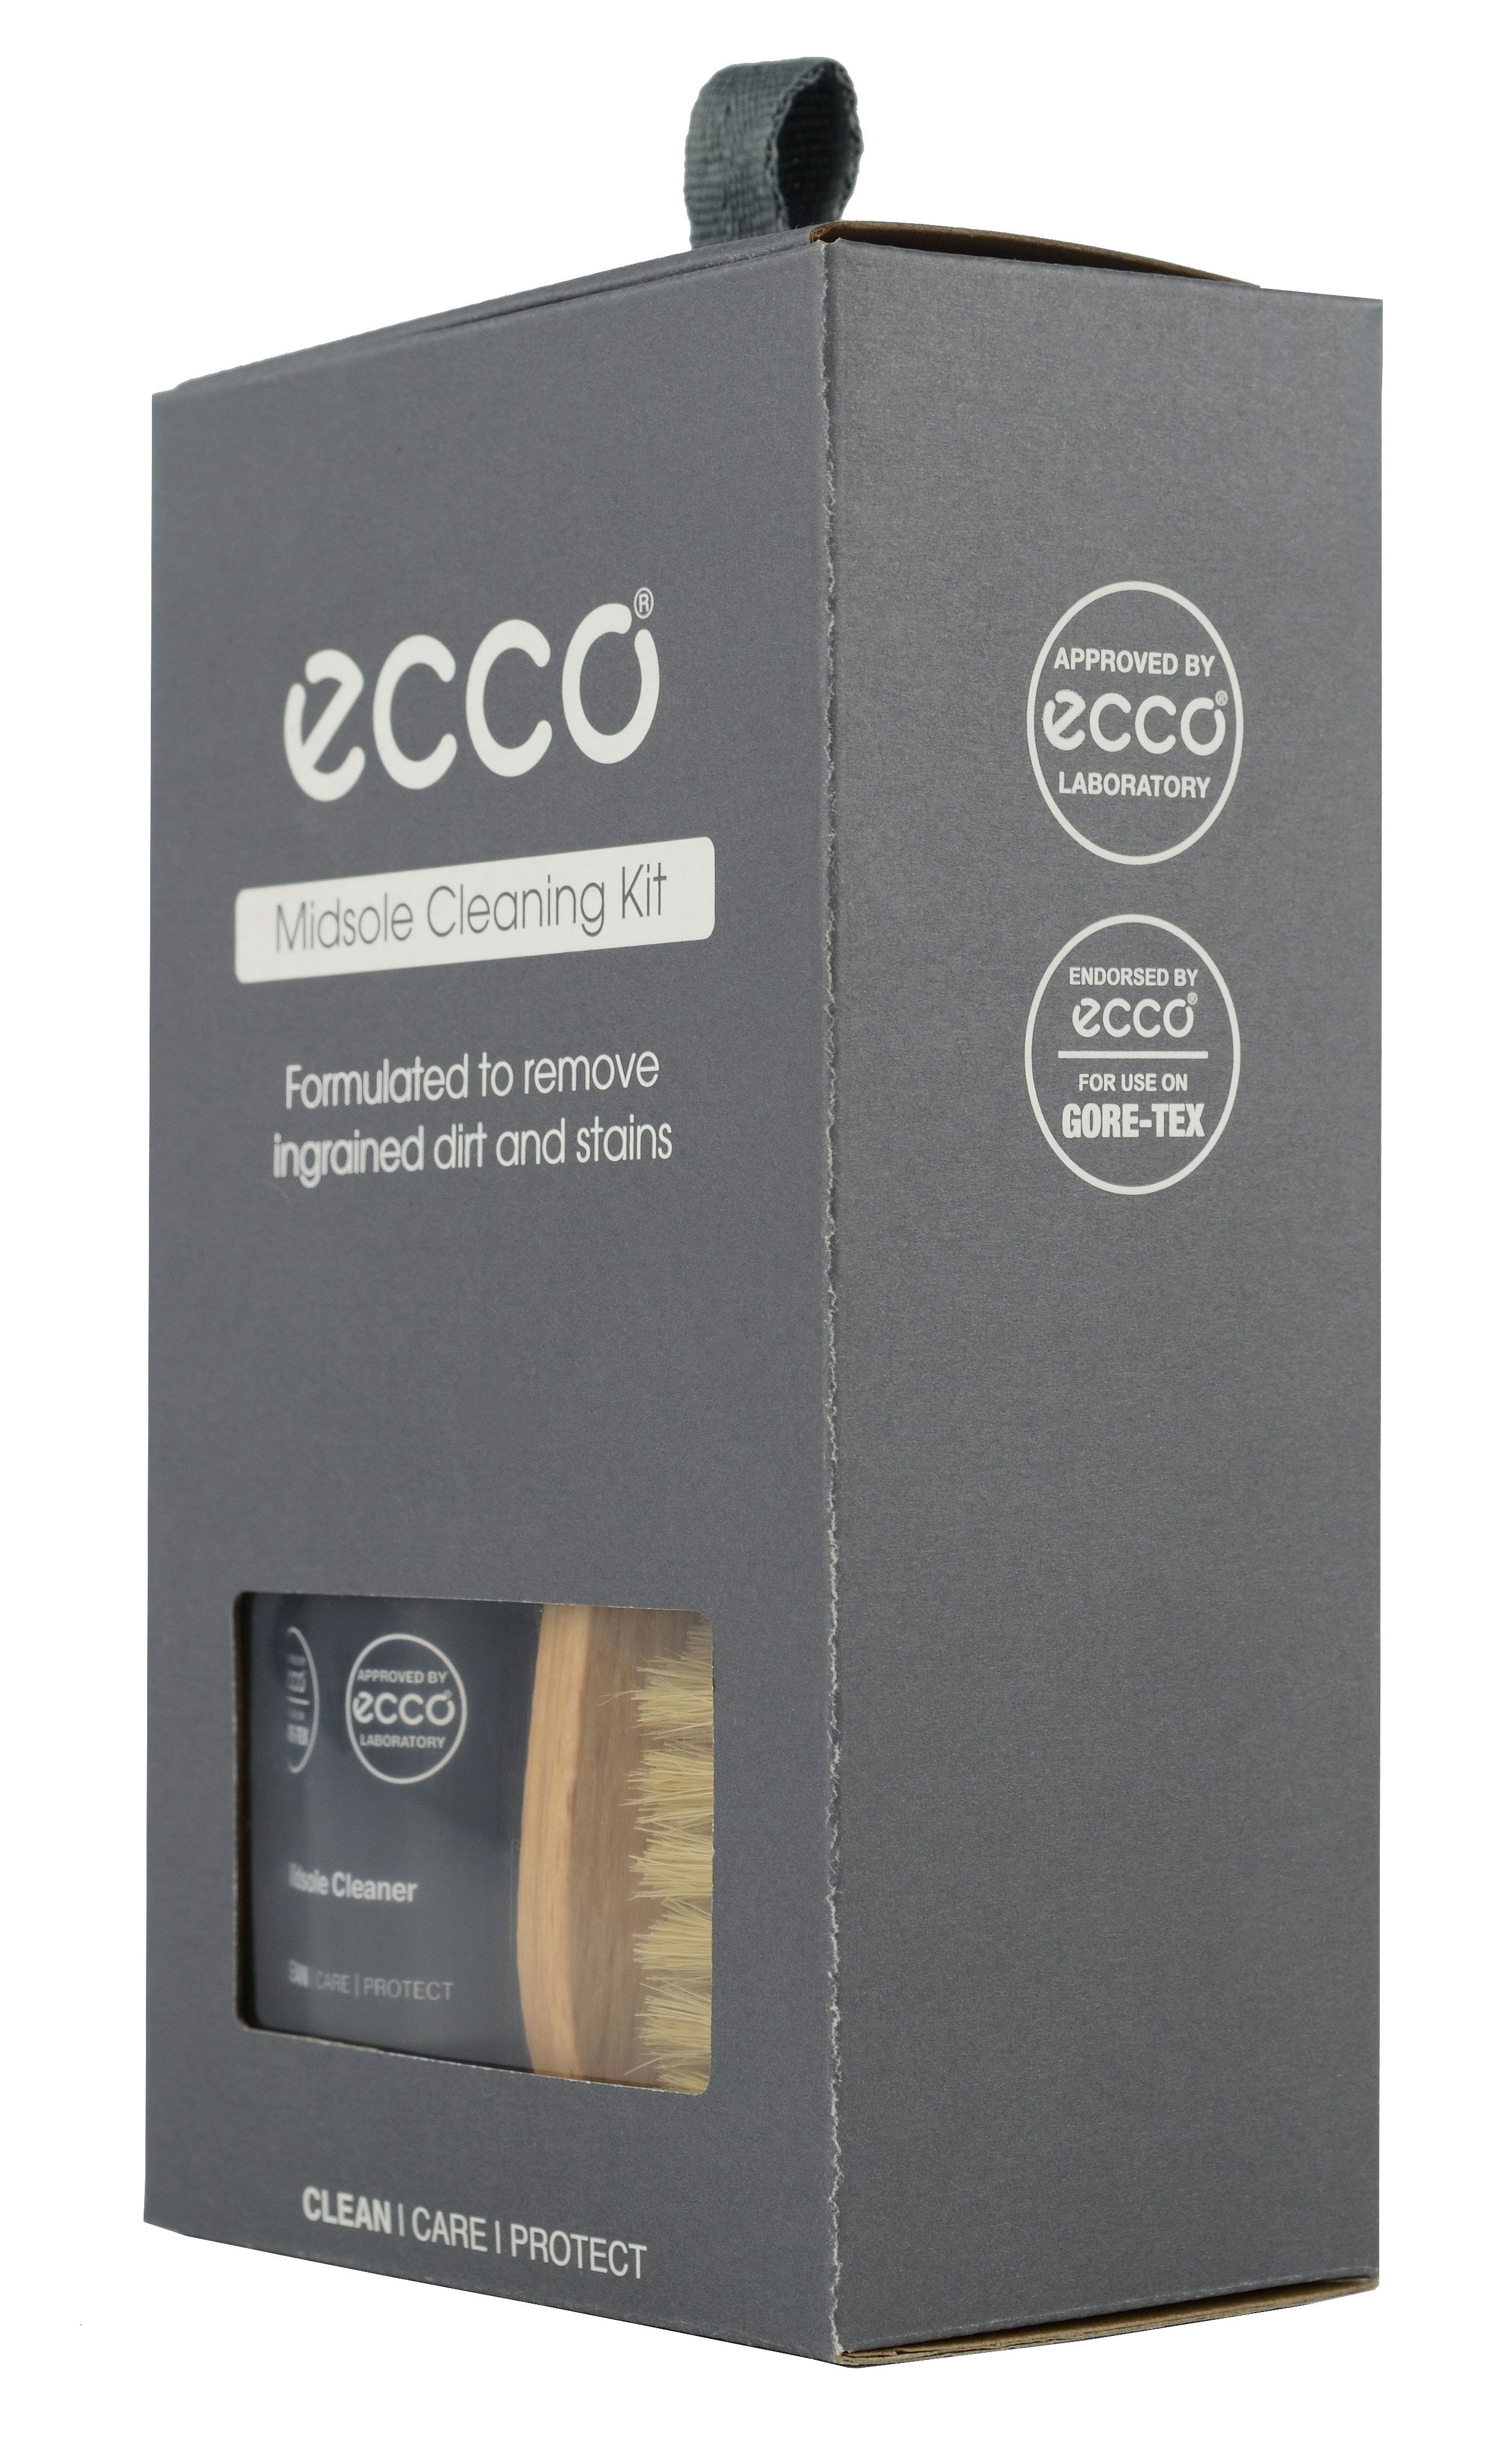 Midsole Cleaning Kit - ECCO.com